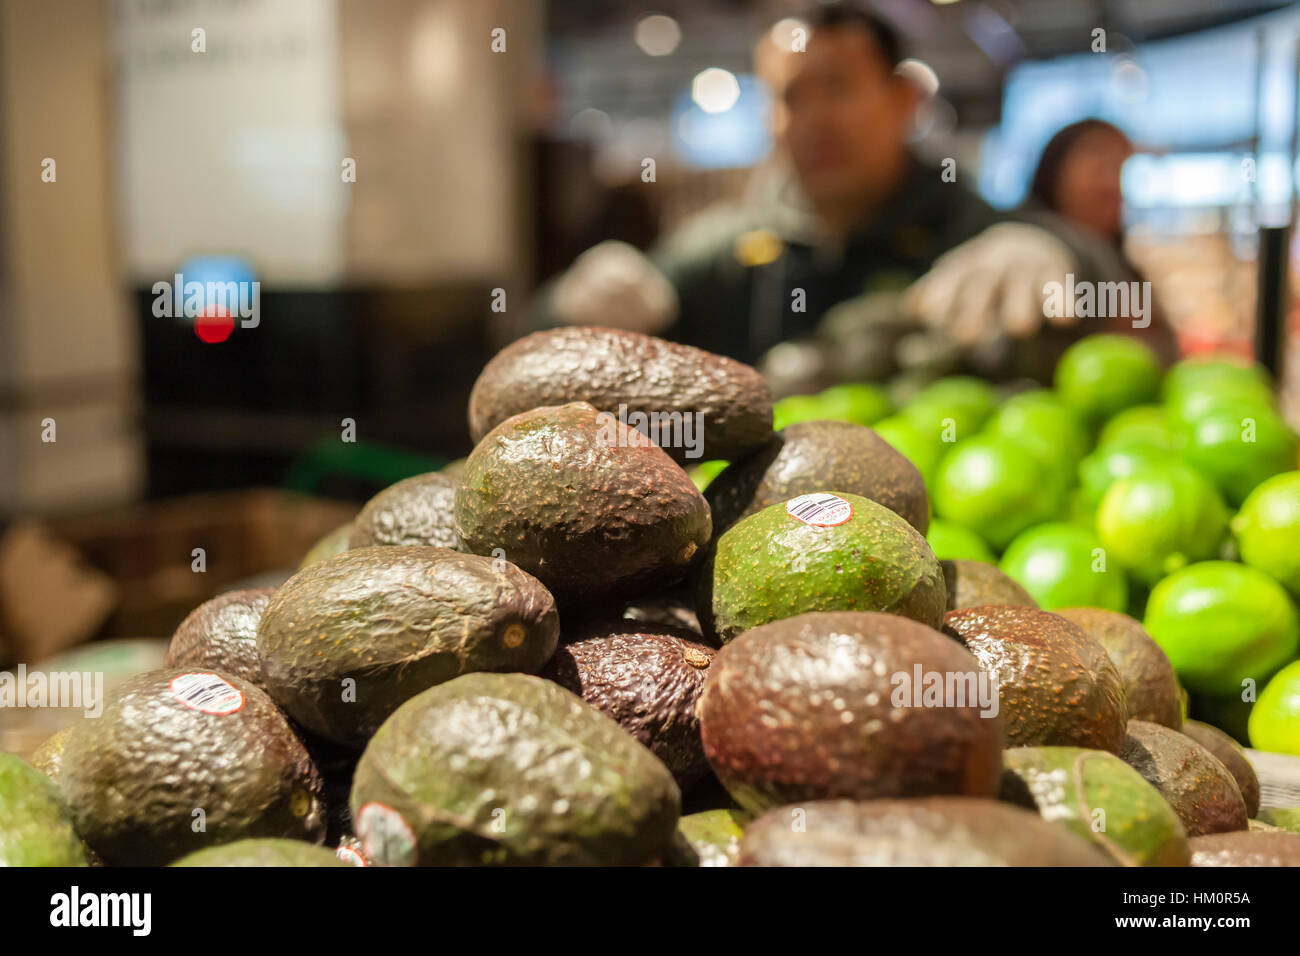 Mexico grown avocados in the new Whole Foods Market opposite Bryant Park in New York on opening day Saturday, January 28, 2017. The store in Midtown Manhattan is the chain's 11th store to open in the city. The store has a large selection of prepared foods from a diverse group of vendors inside the store.  (© Richard B. Levine) Stock Photo